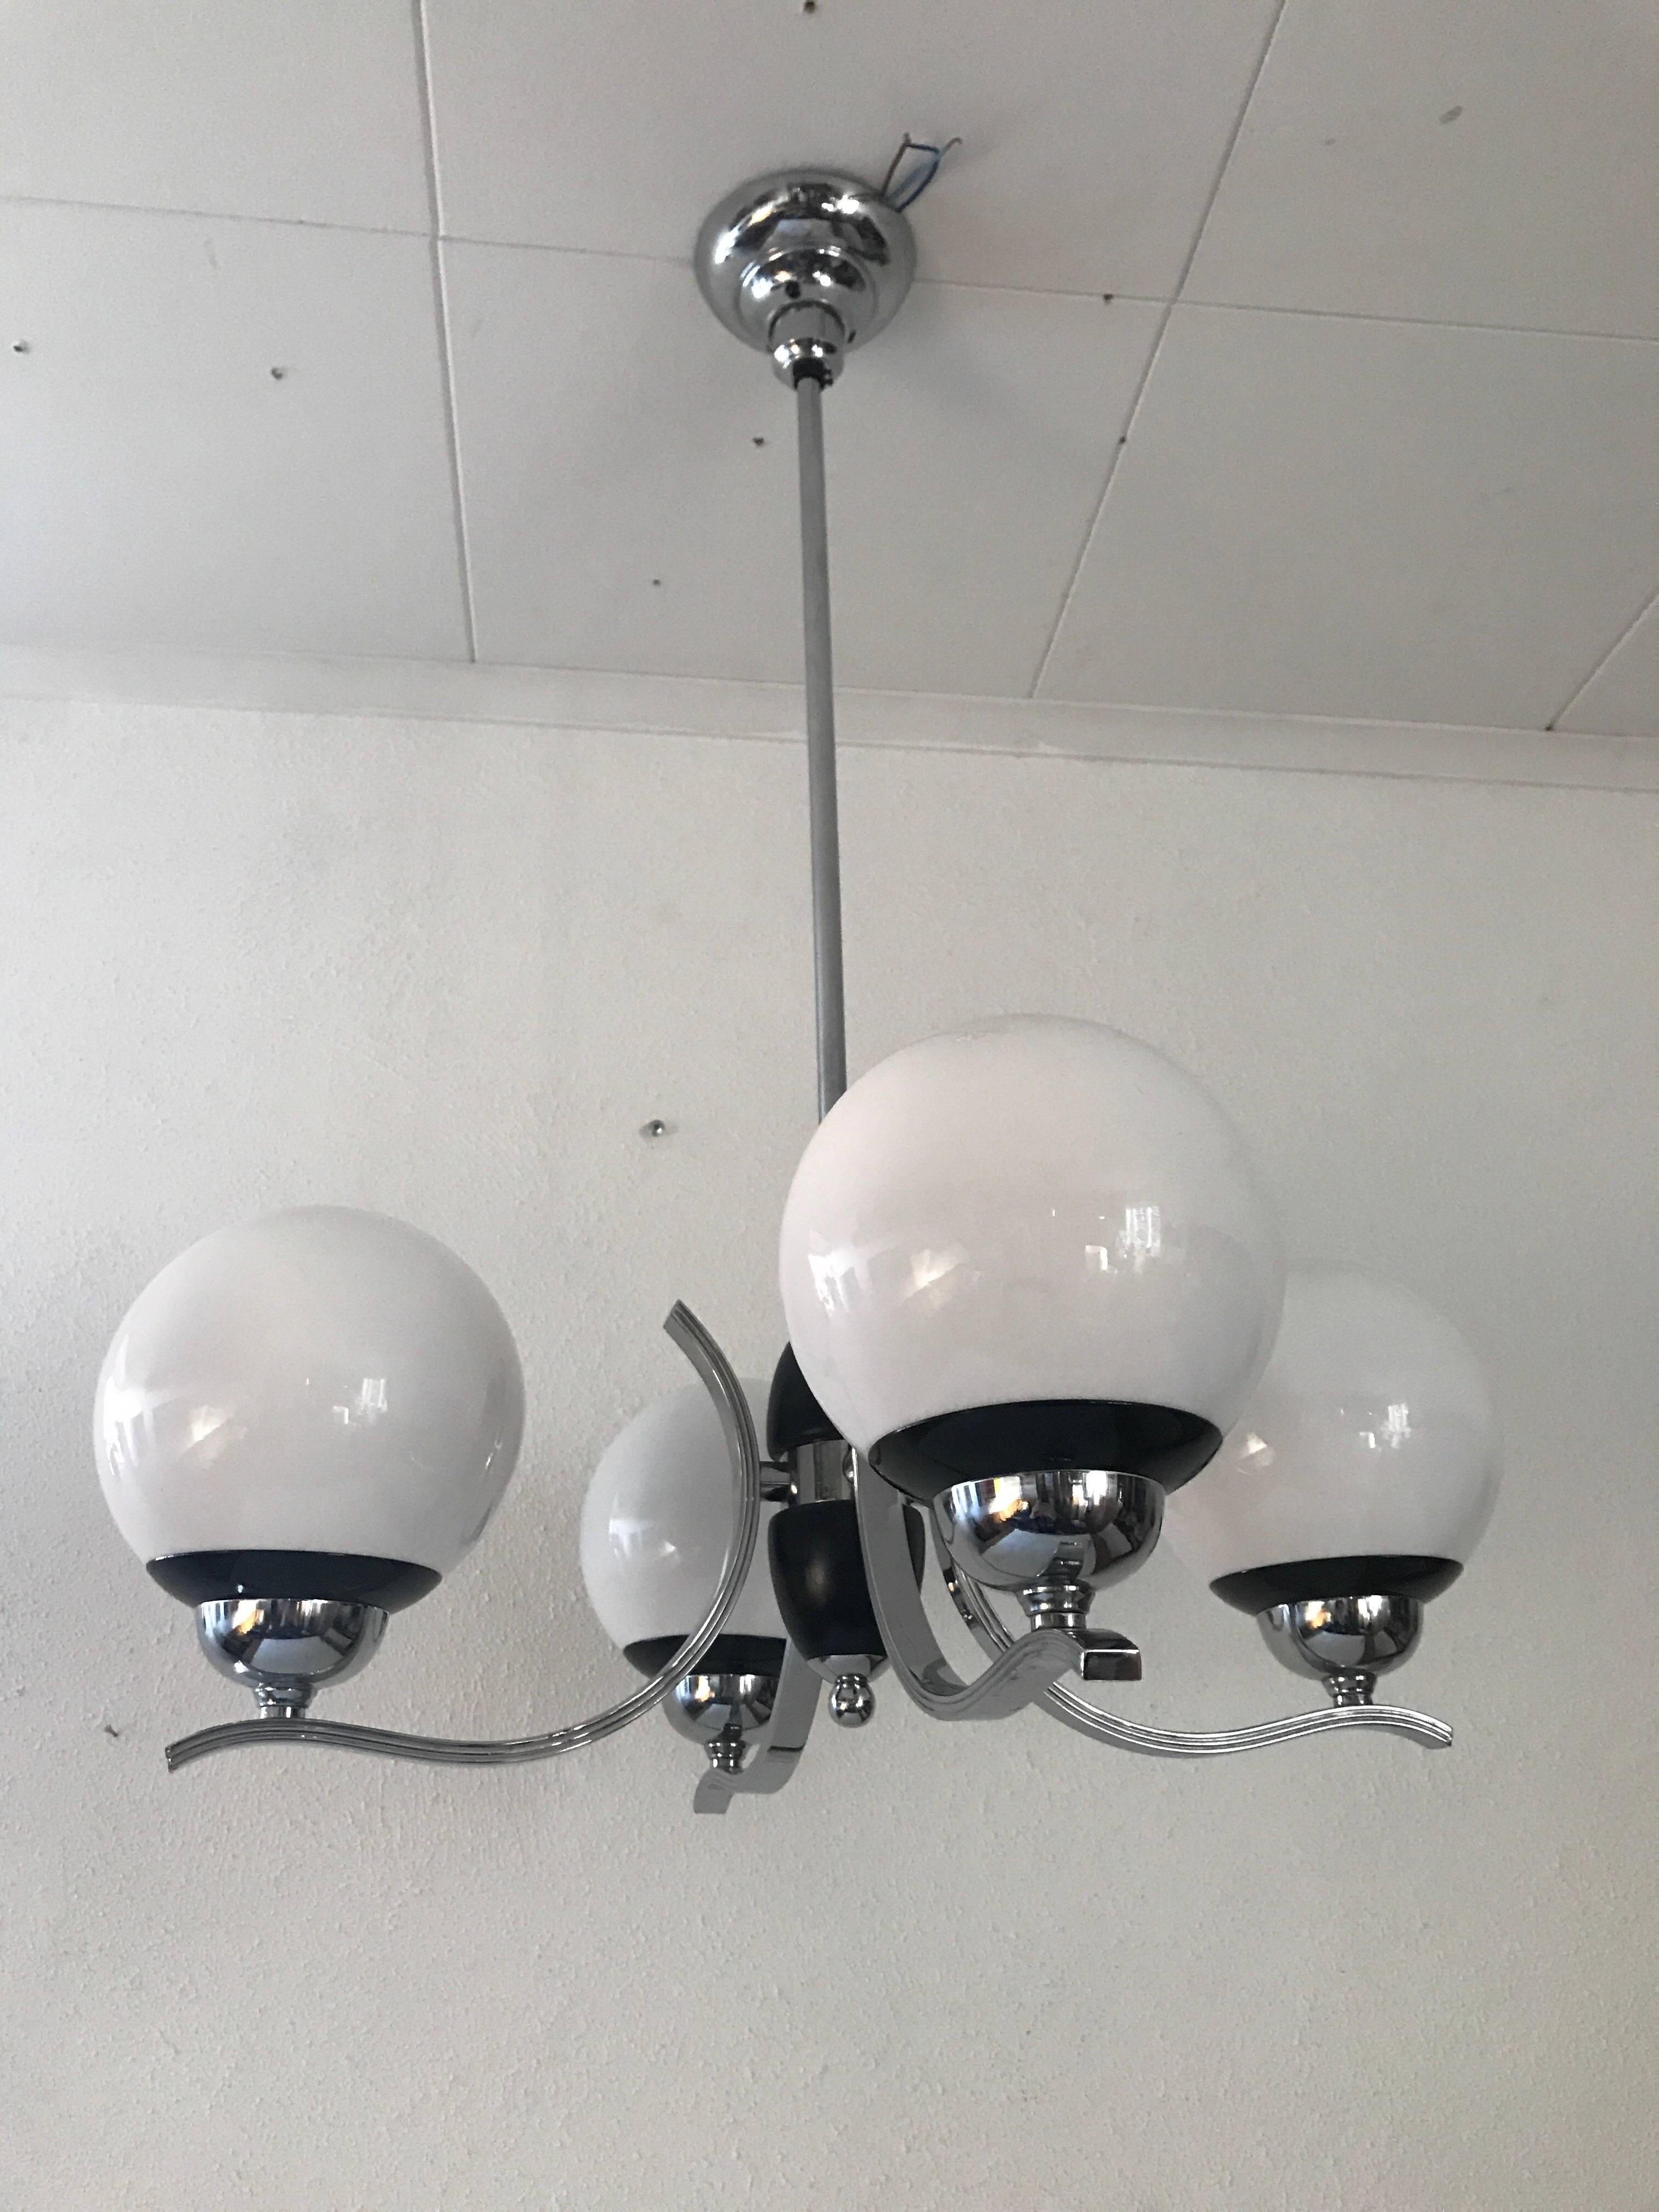 Swedish 1935 Art Deco chrome and glass four-bulb chandelier.
A beautiful chandelier made of chrome steel, black painted wood details in the center, and four opal glass shades. The chandelier is in a fantastic condition without any damages or flaws.